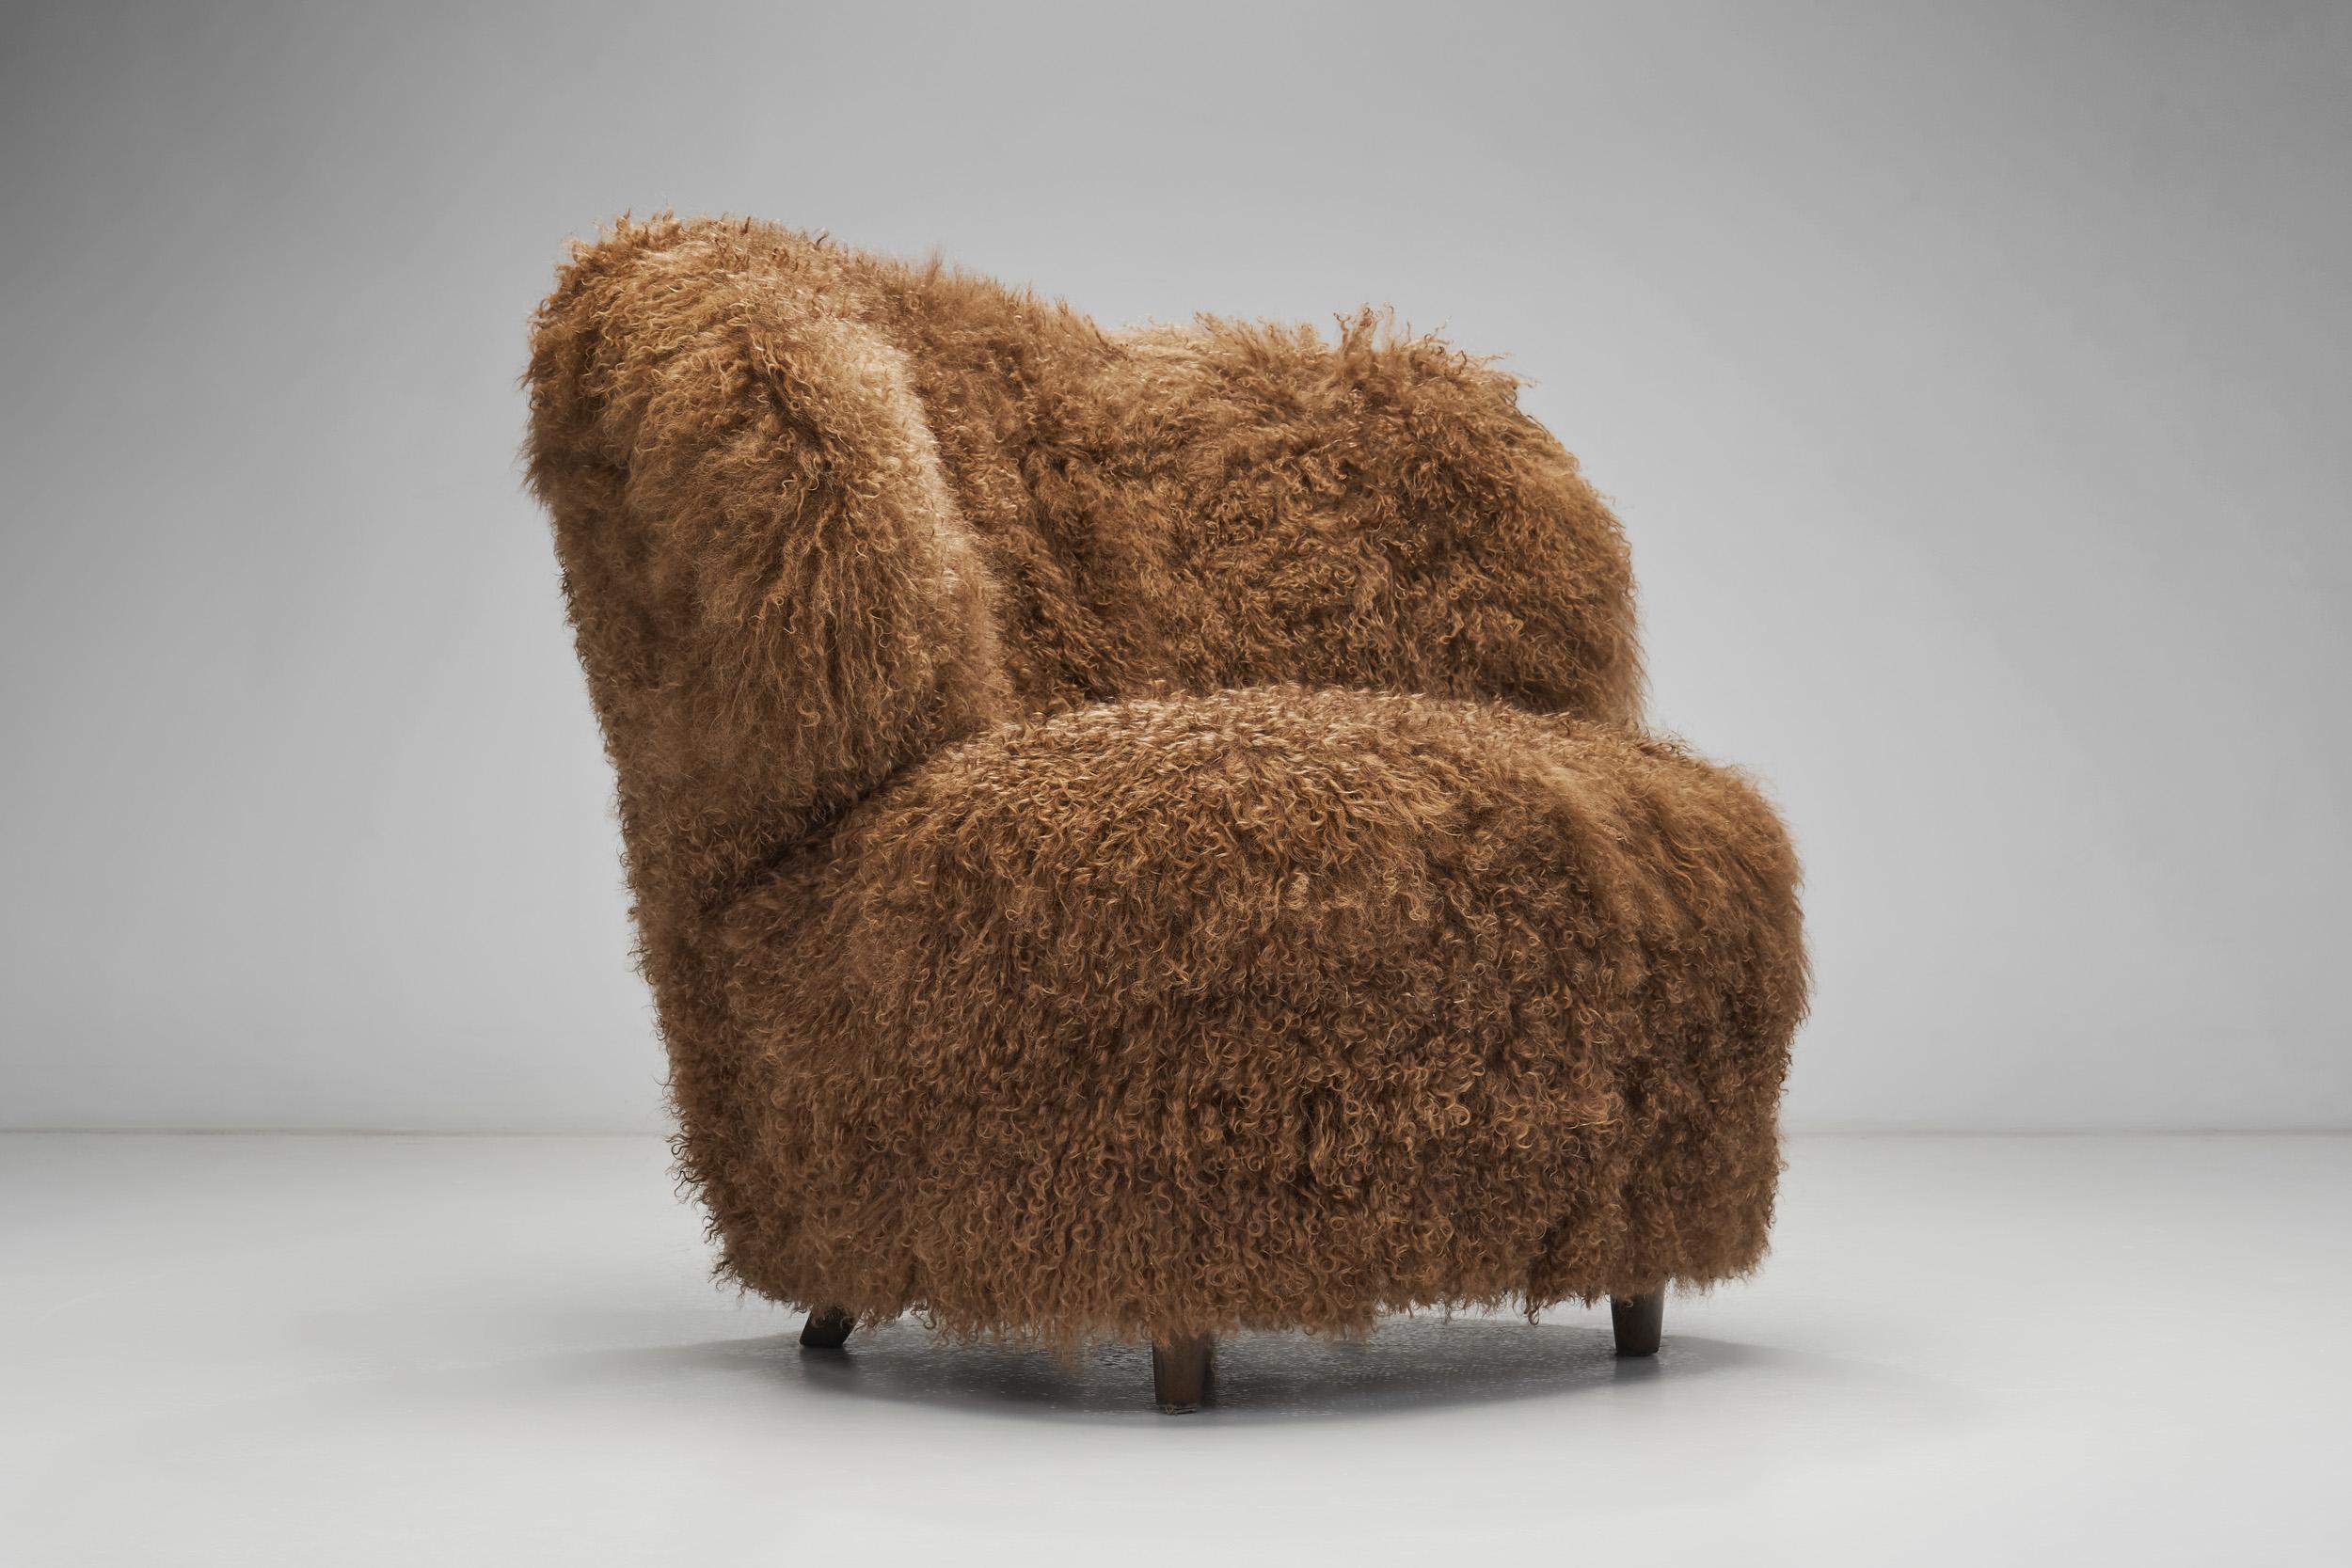 Mid-20th Century Nordic Modern Lounge Chairs in Longhair Sheepskin, Finland ca 1950s For Sale